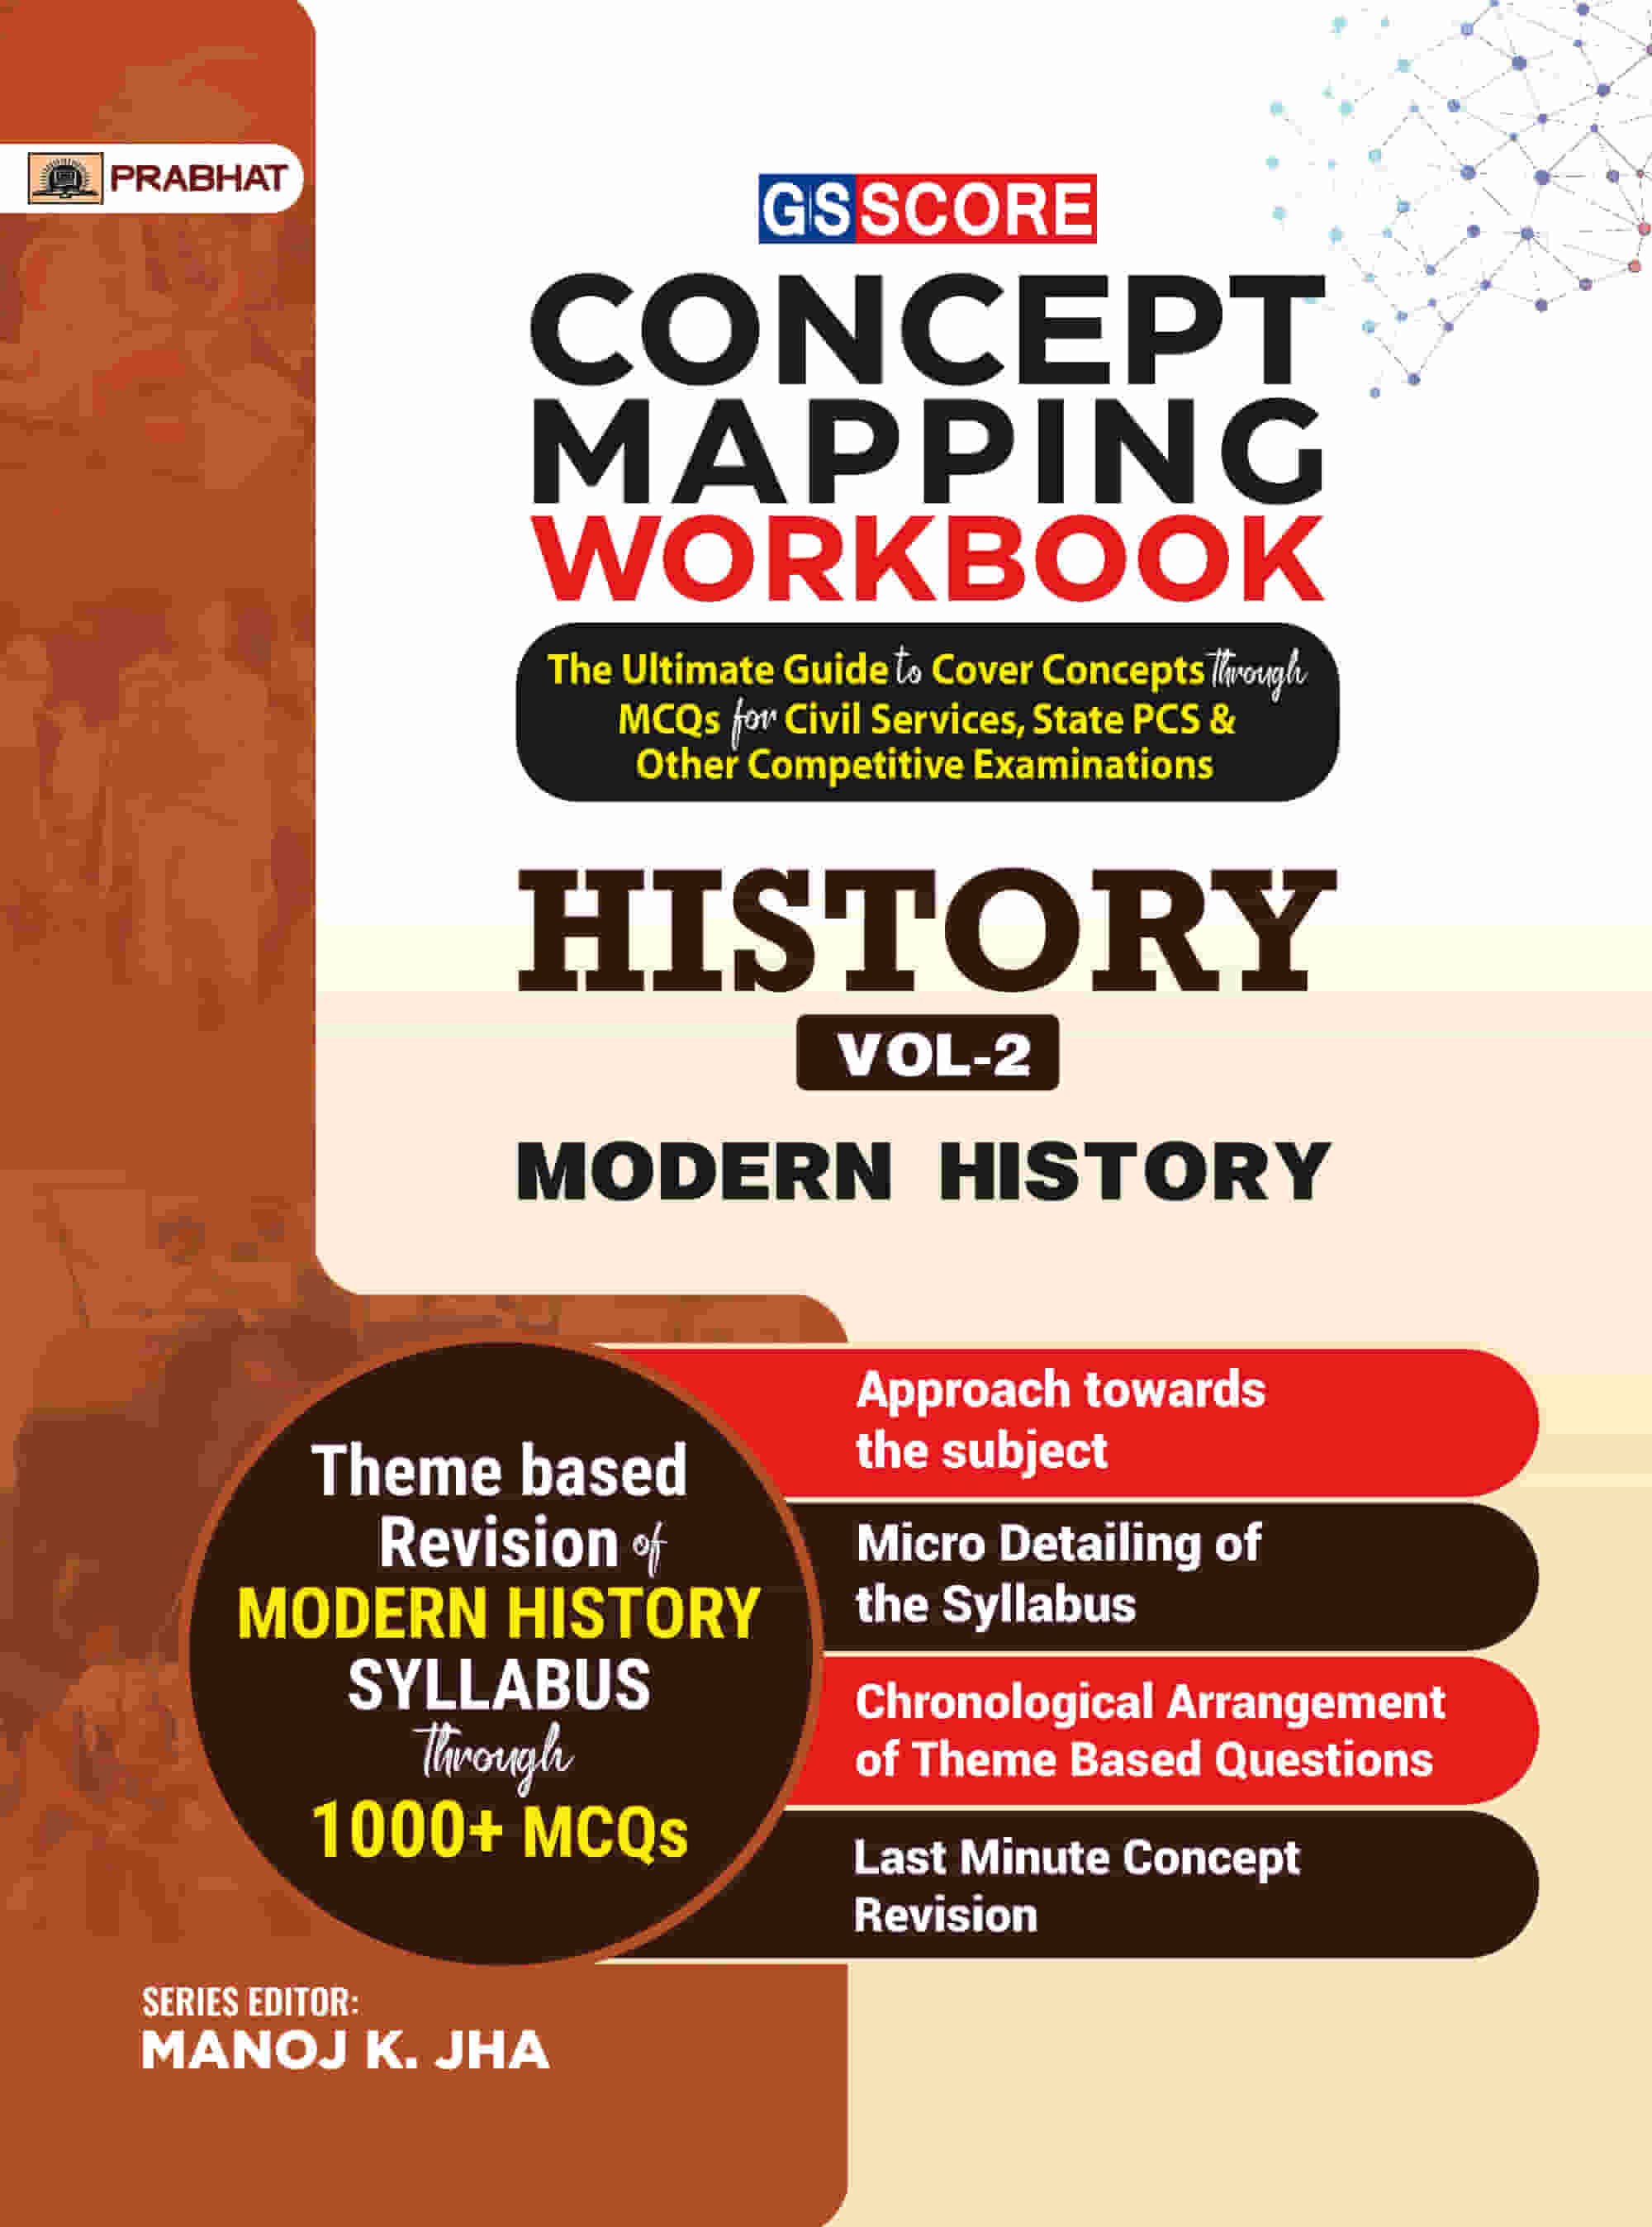 GS SCORE Concept Mapping Workbook - History Vol-2 : Modern History